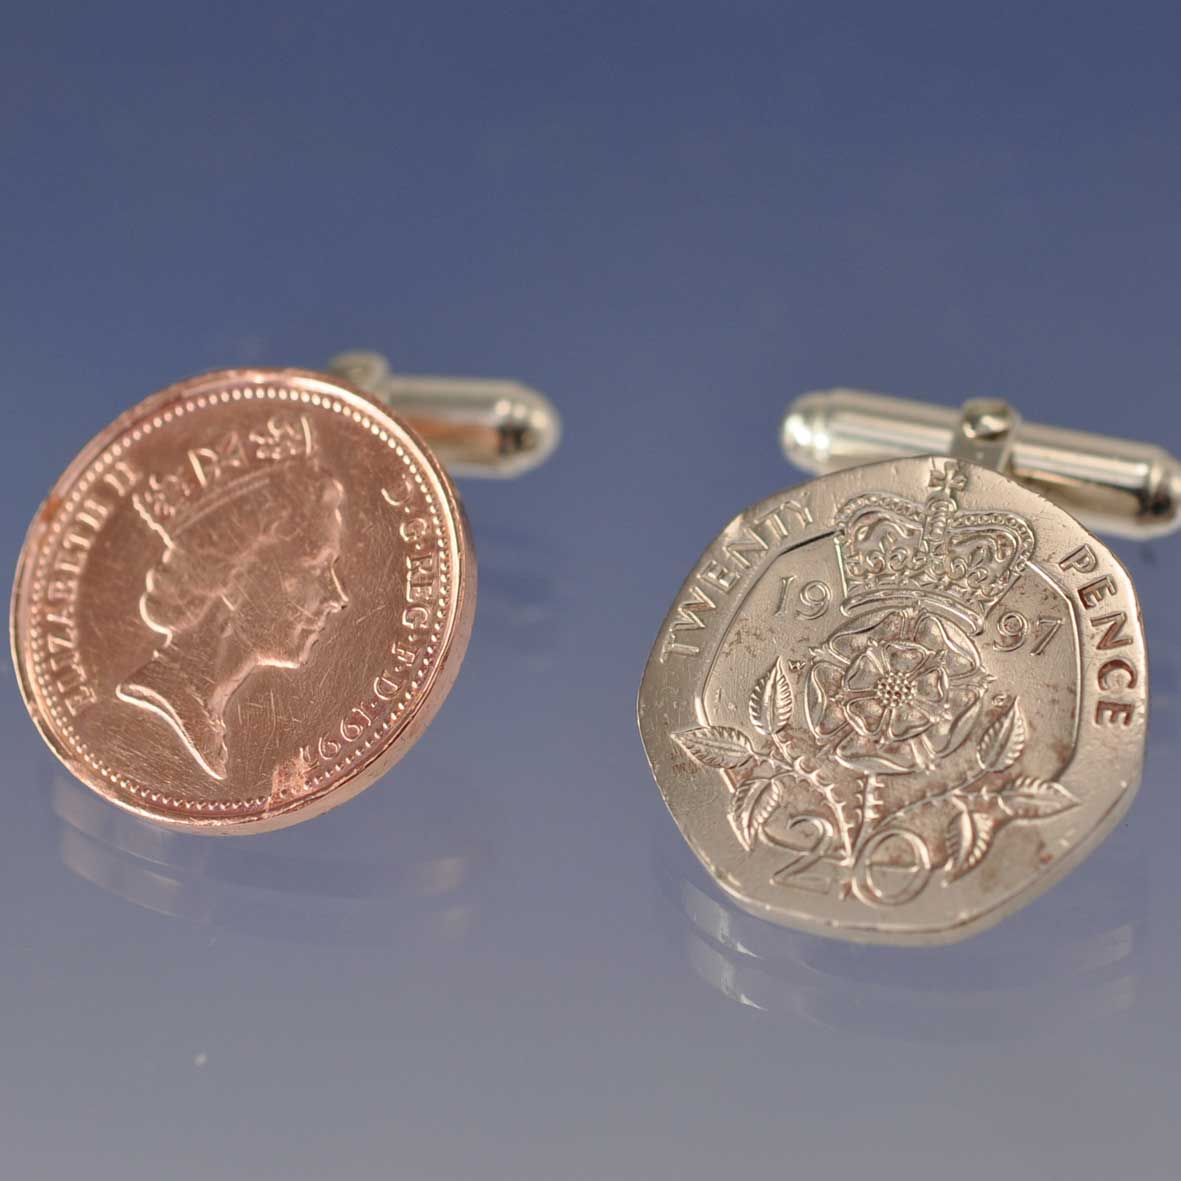 Your Coins Made into Cufflinks Cufflinks by Chris Parry Jewellery